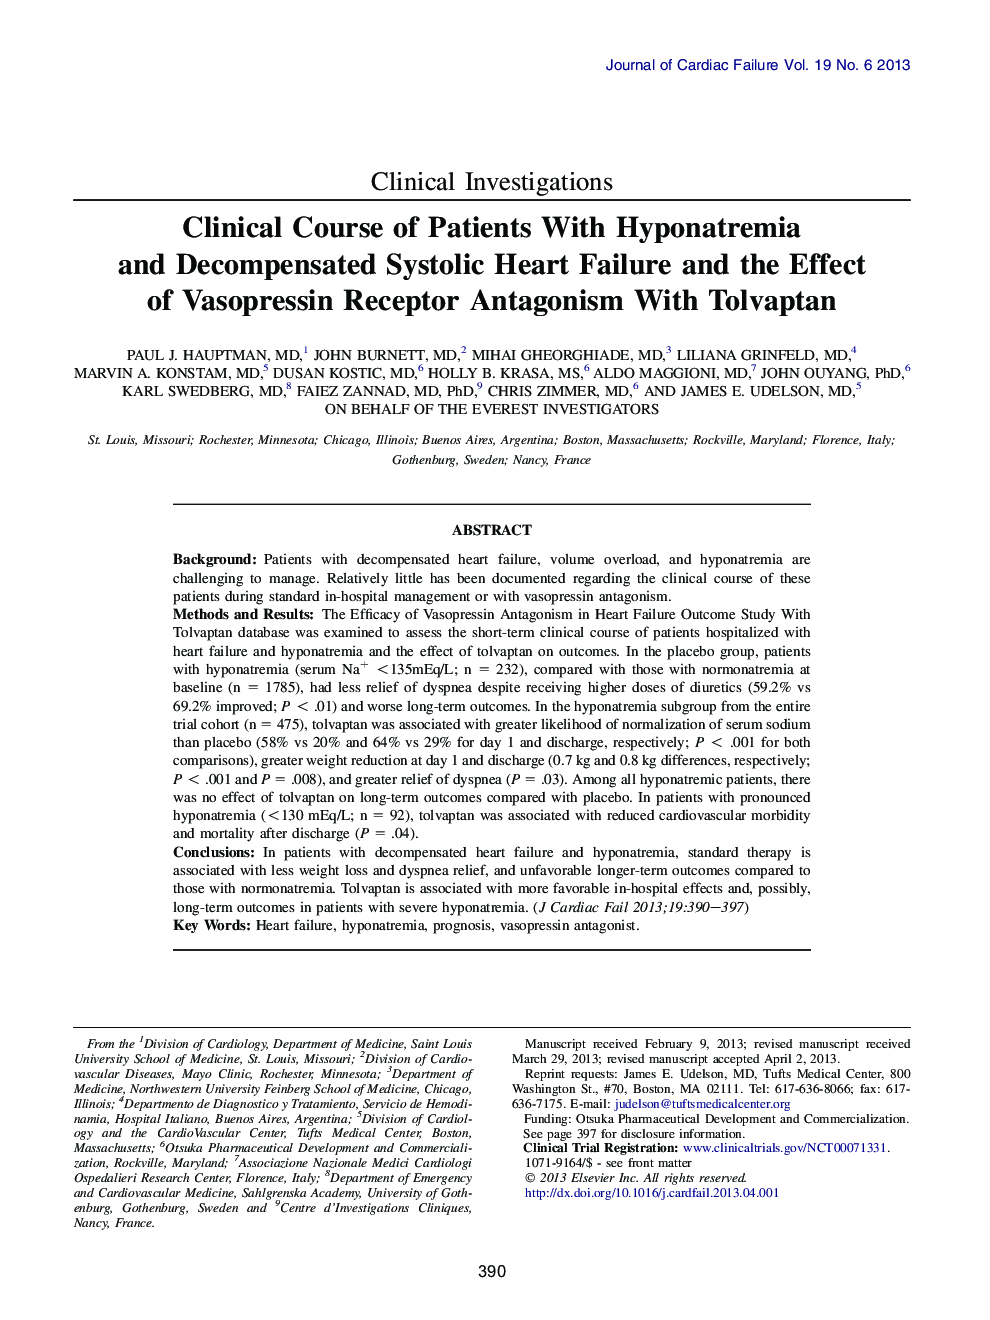 Clinical Course of Patients With Hyponatremia and Decompensated Systolic Heart Failure and the Effect of Vasopressin Receptor Antagonism With Tolvaptan 